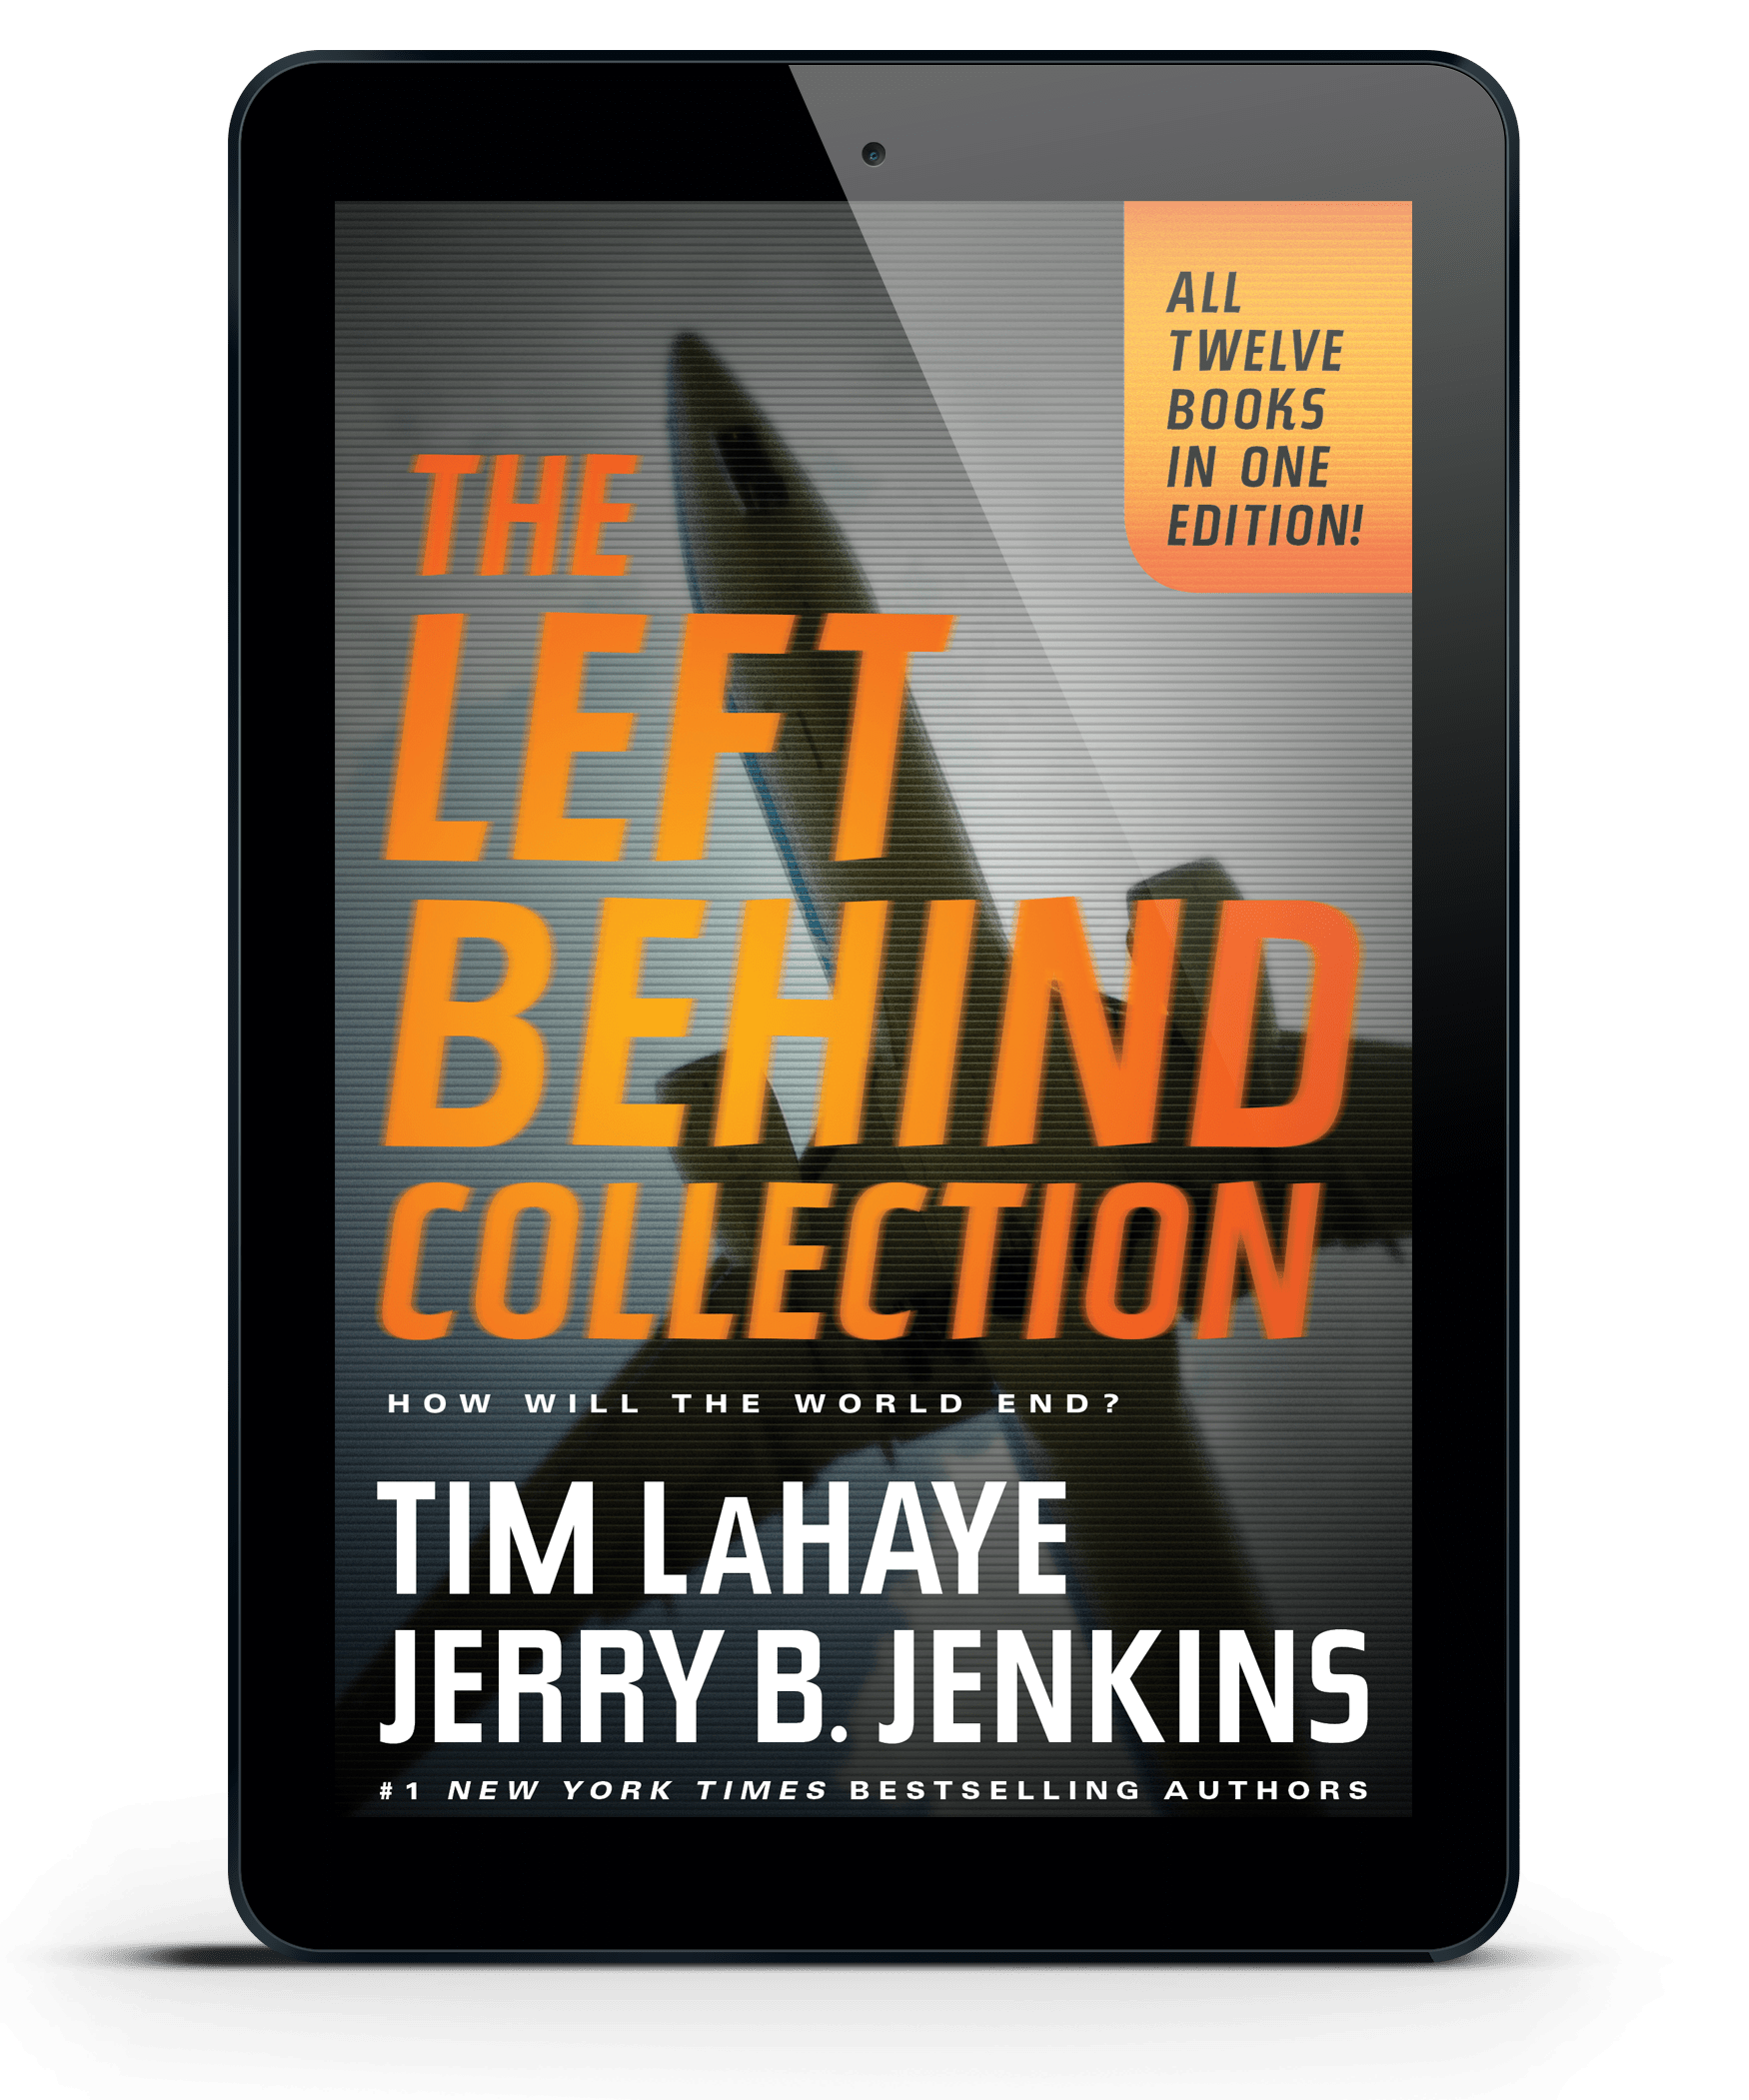 Left Behind, eBook collection